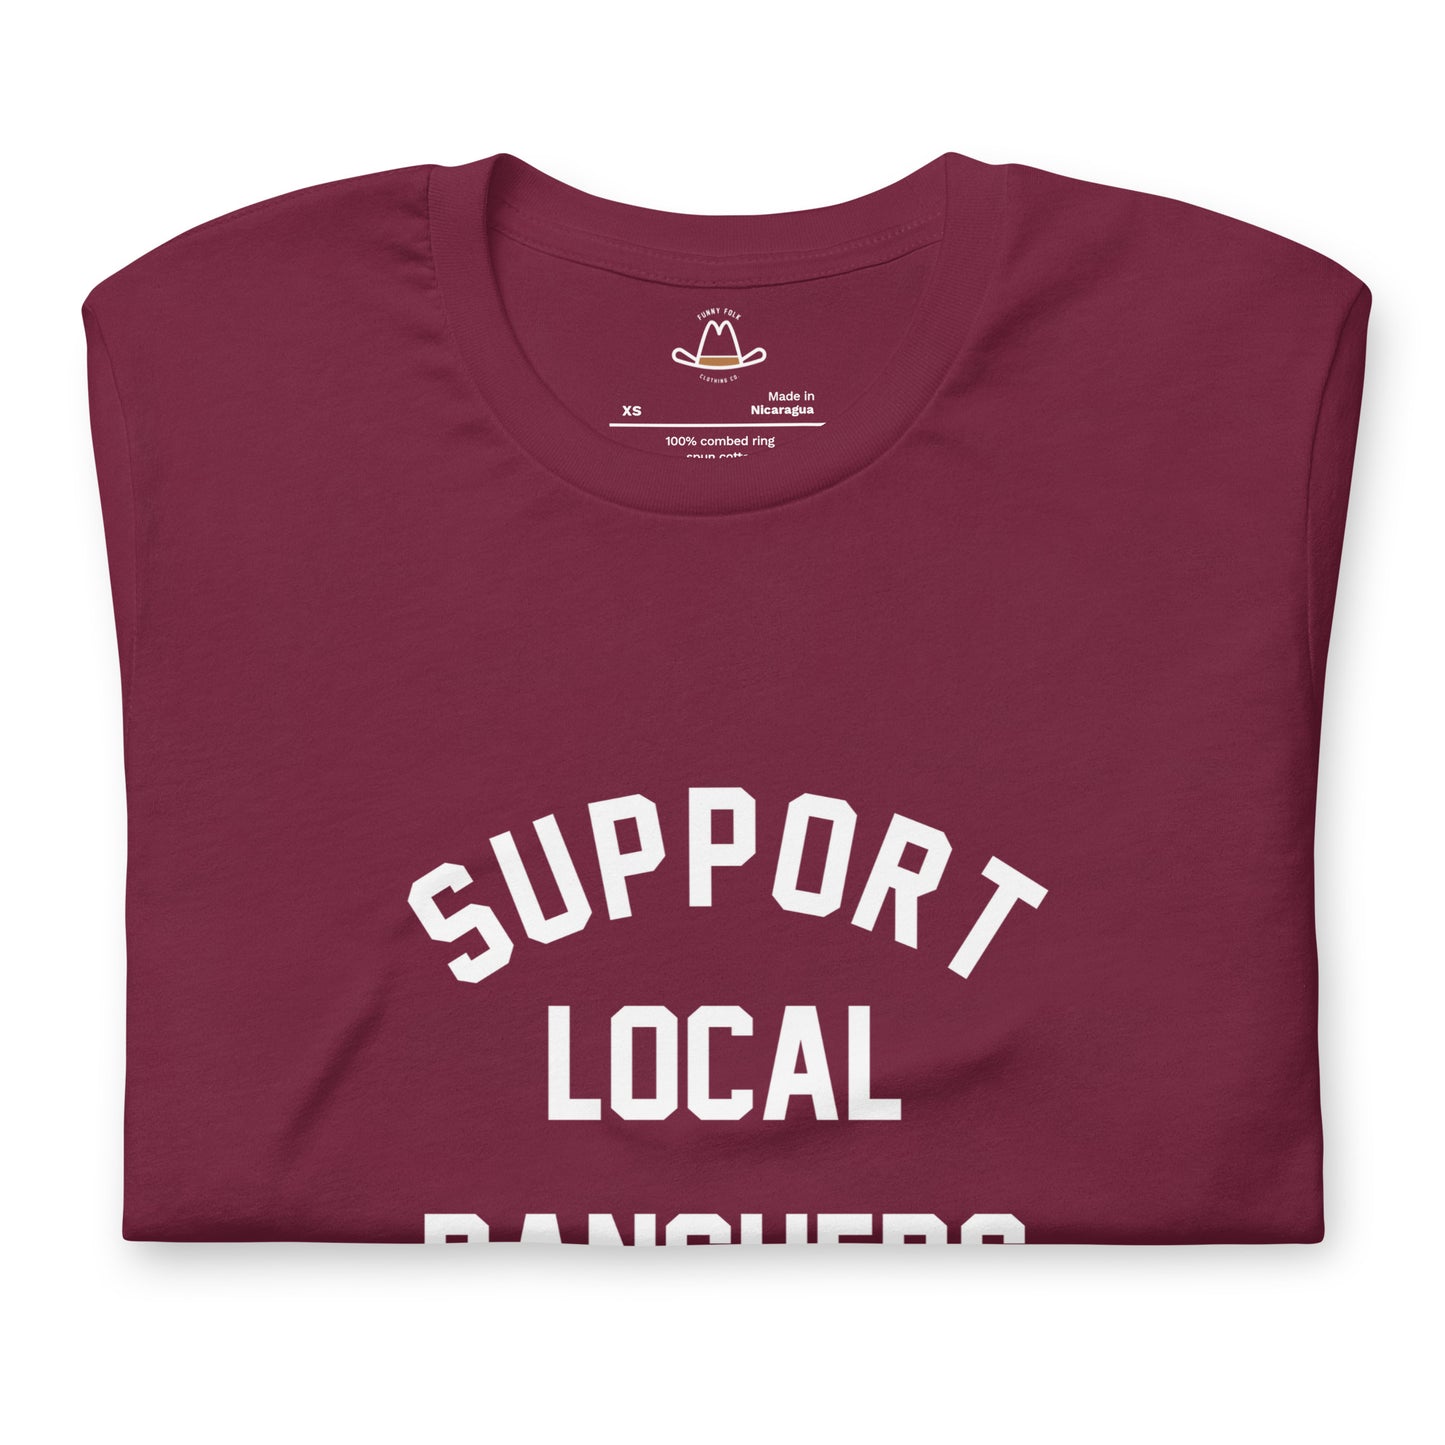 Support Local Ranchers Original Tee